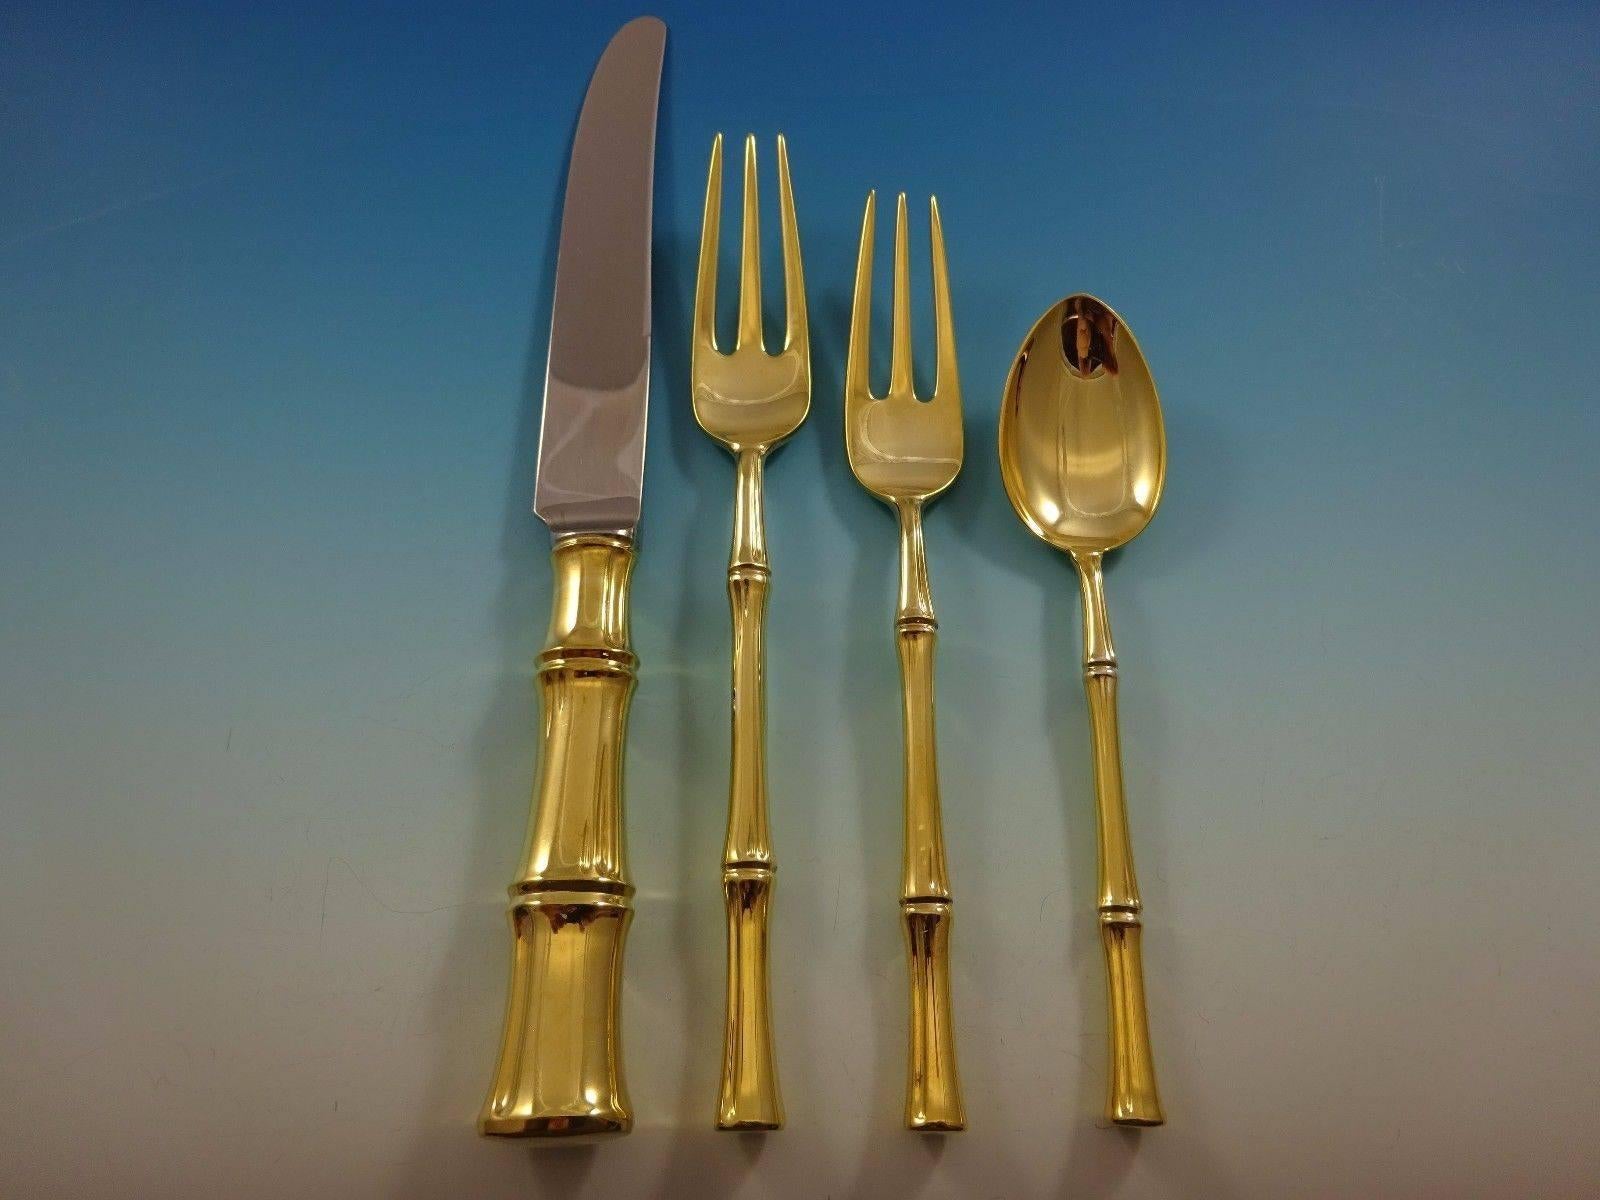 Bamboo Gold by Tiffany Sterling silver flatware set of 24 pieces. Gold flatware is on trend and makes a bold statement on your table. 

This set is vermeil (completely gold-washed) and includes:
 
 
Six knives, 9 3/8